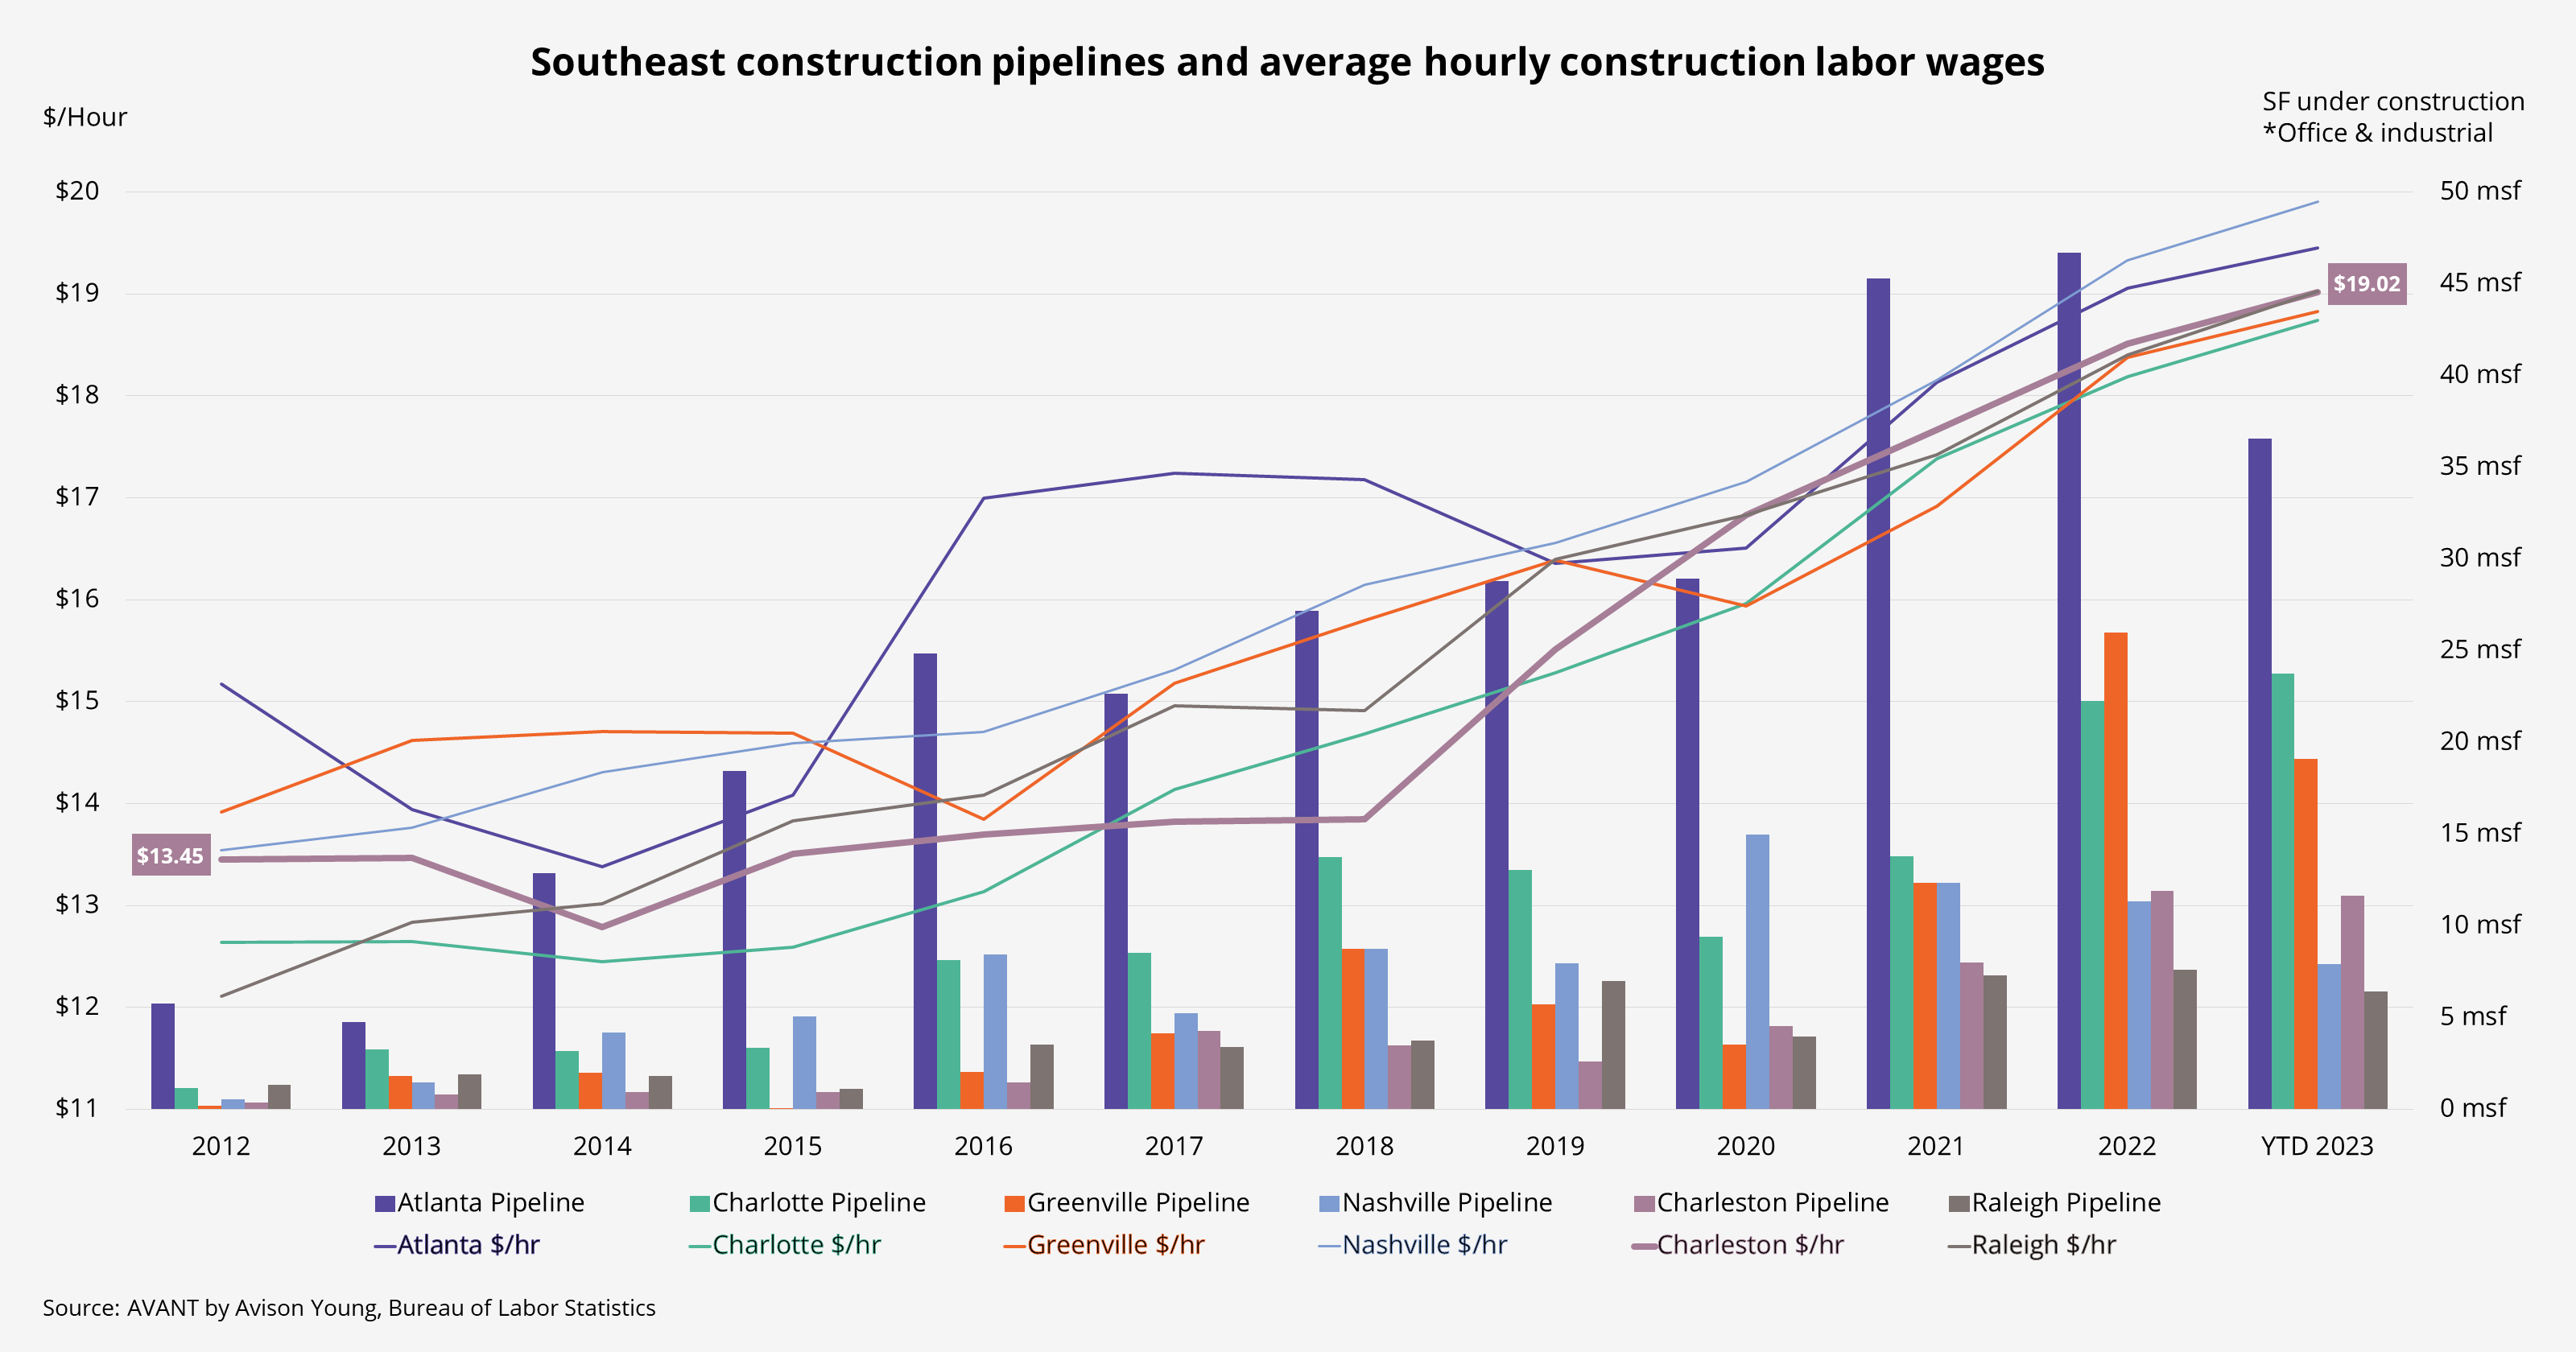 Southeast construction pipelines and average hourly labor wages in Charleston, Atlanta, Charlotte, Greenville, Nashville, Raleigh 2012 through YTD 2023